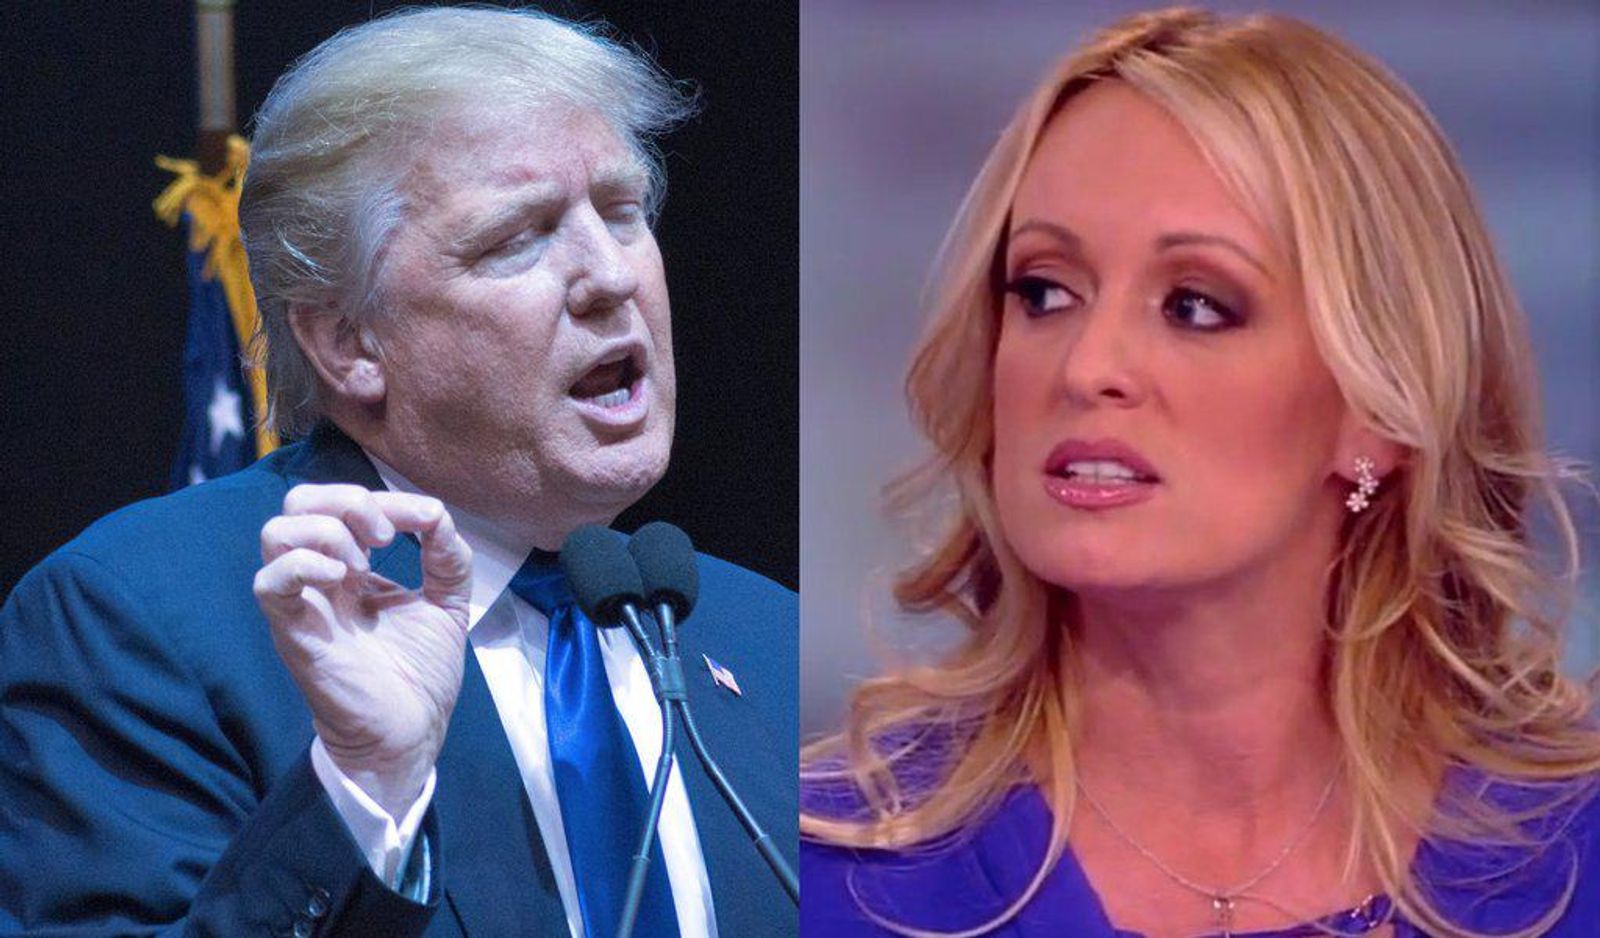 Donald Trump Pulls Out Of Stormy Daniels ‘Hush Money’ Lawsuit